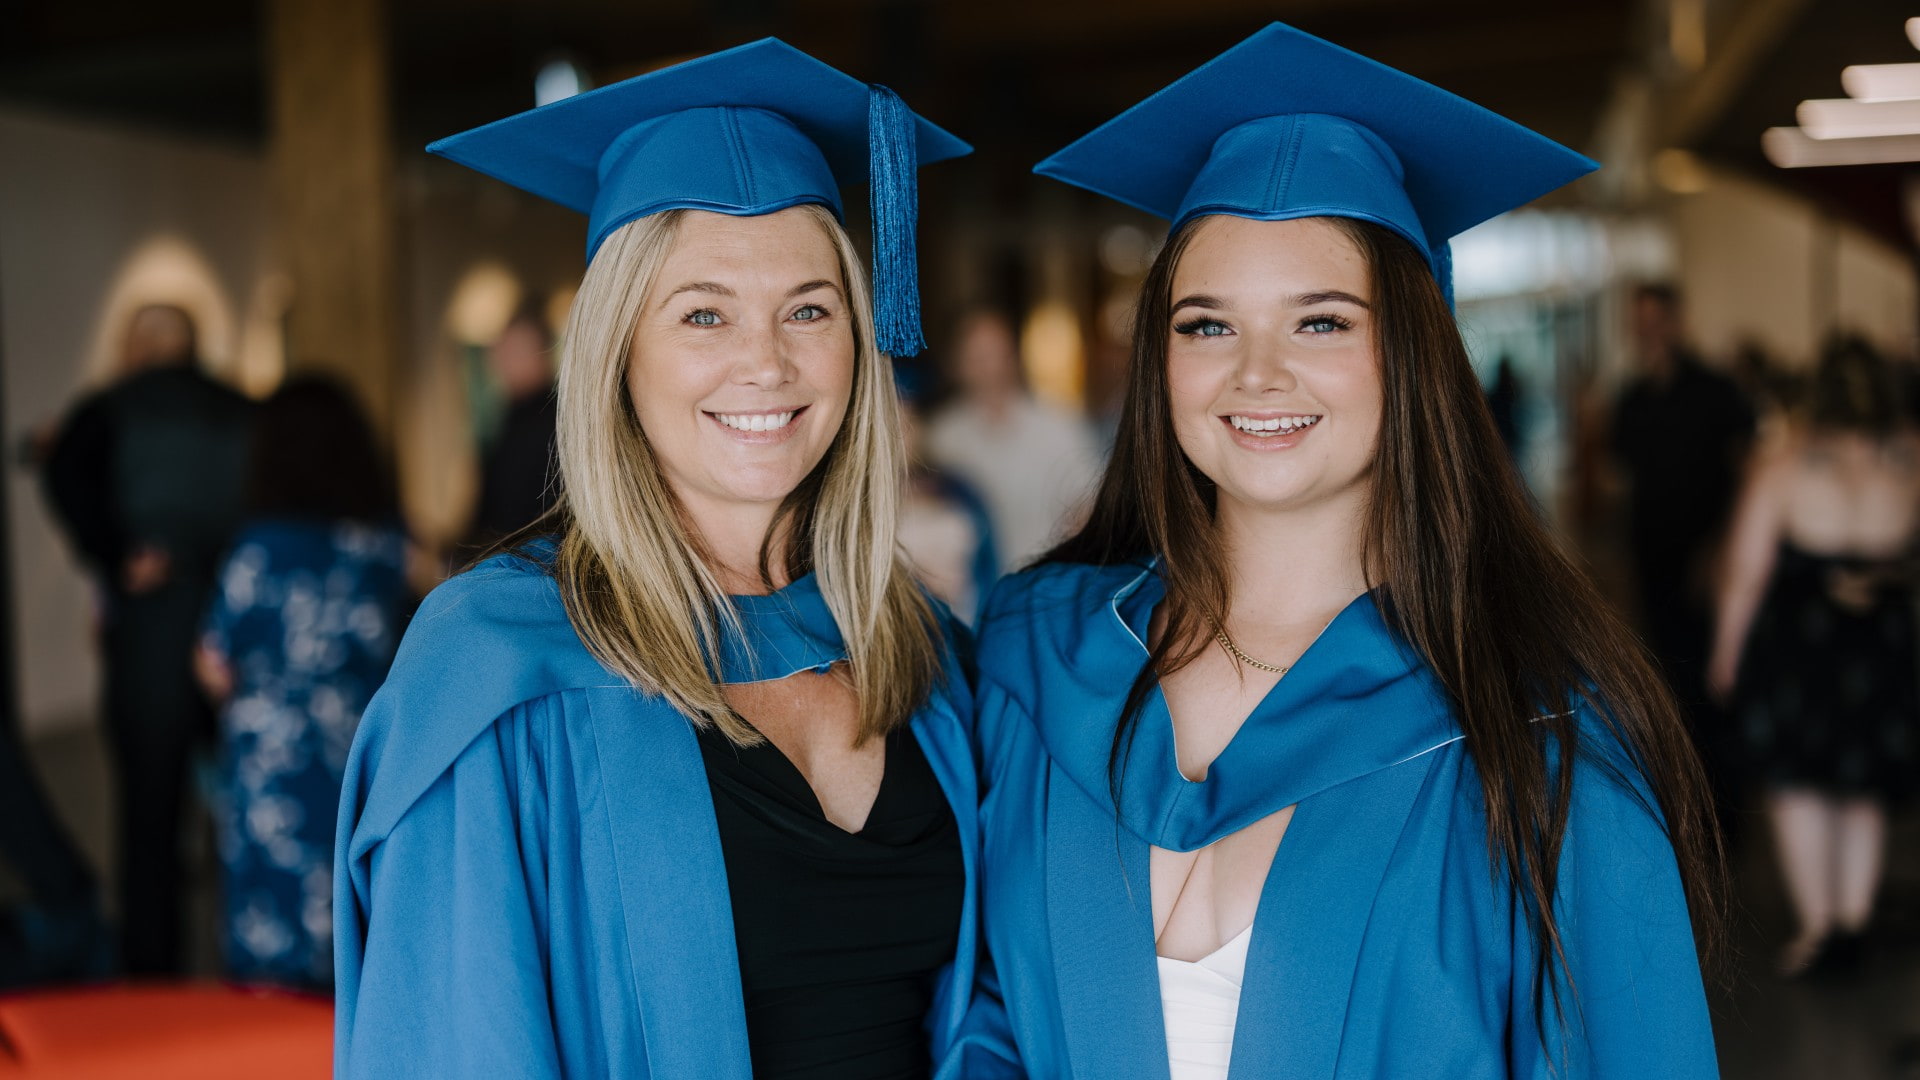 Nicole and Holli Pritchard, wearing blue graduation gowns and caps, stand next to each other and smile. Photo: Michael Gray